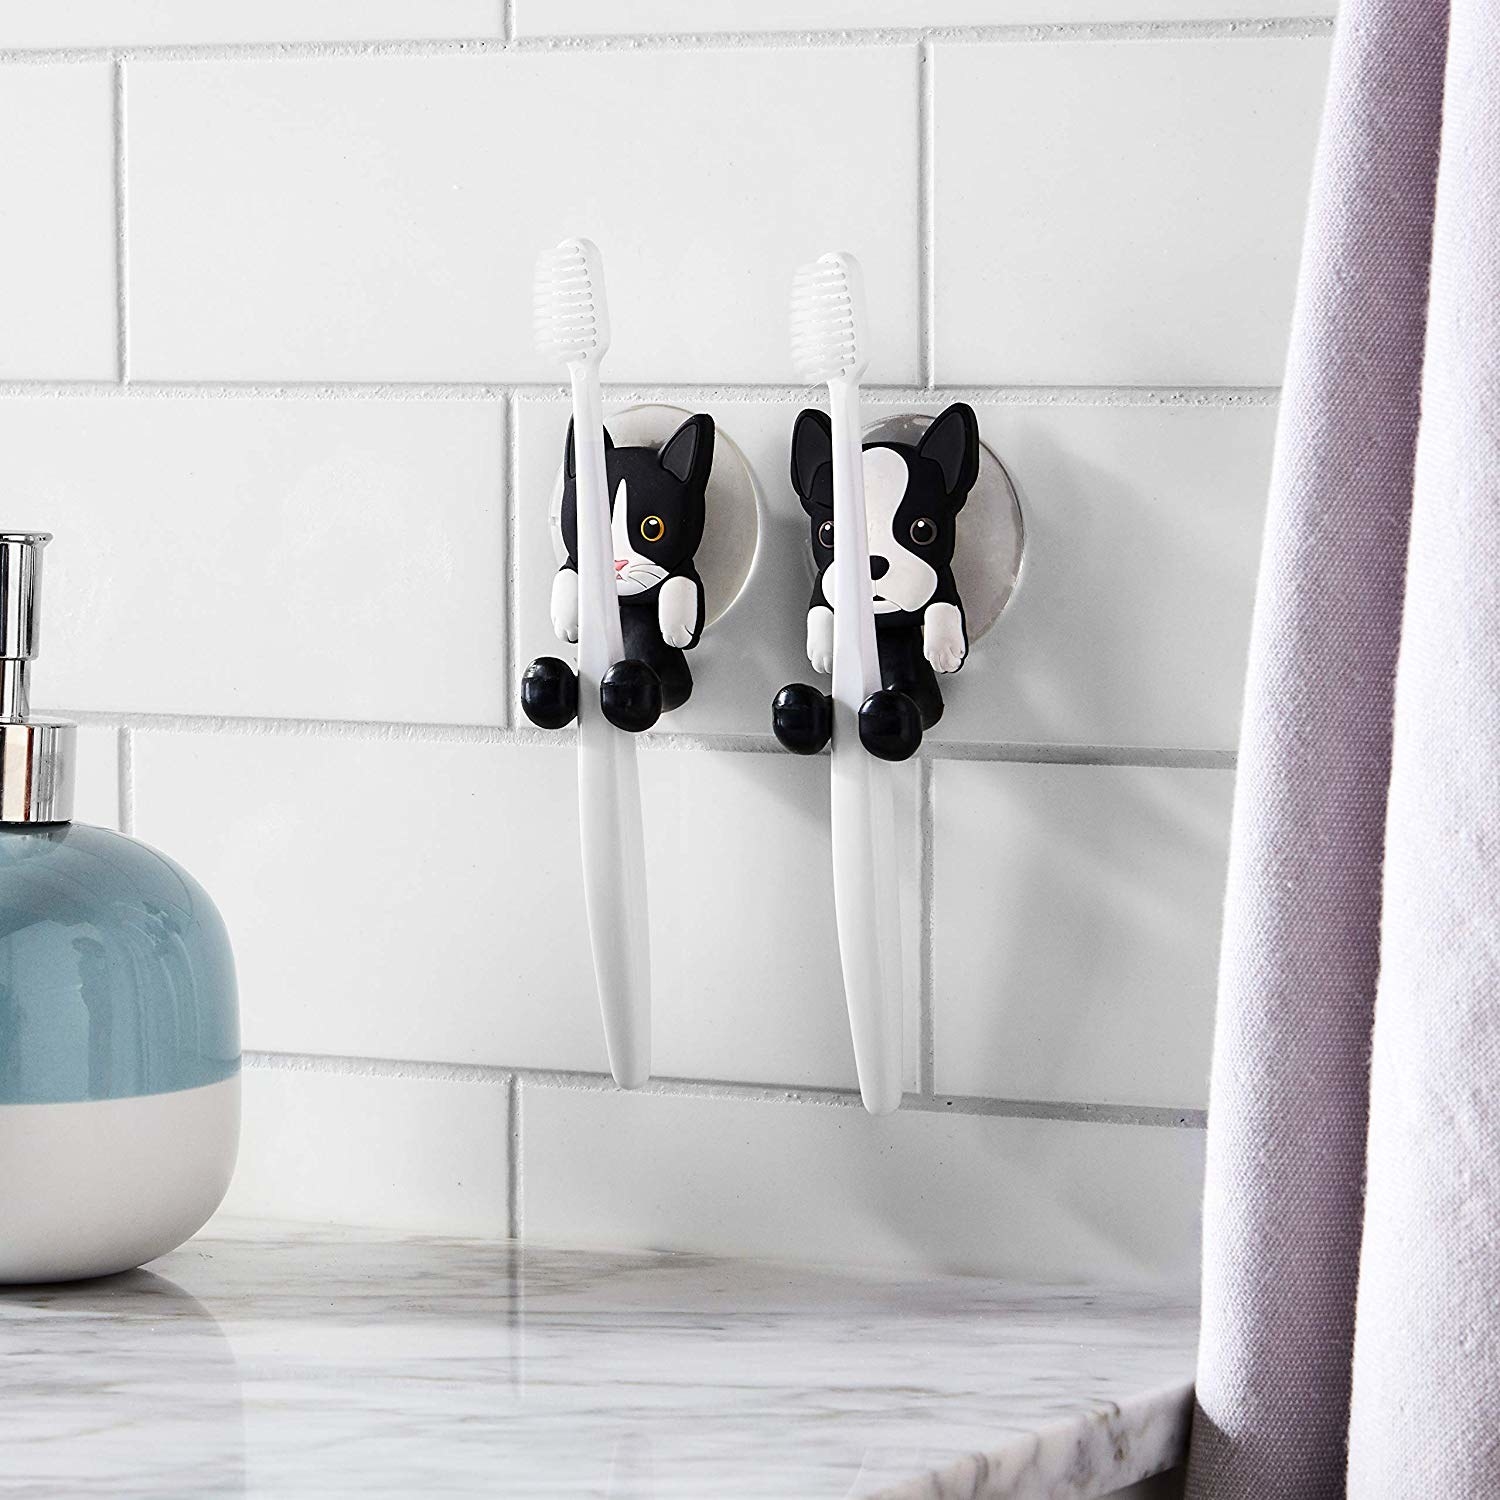 The two toothbrush holders attached to a tile wall